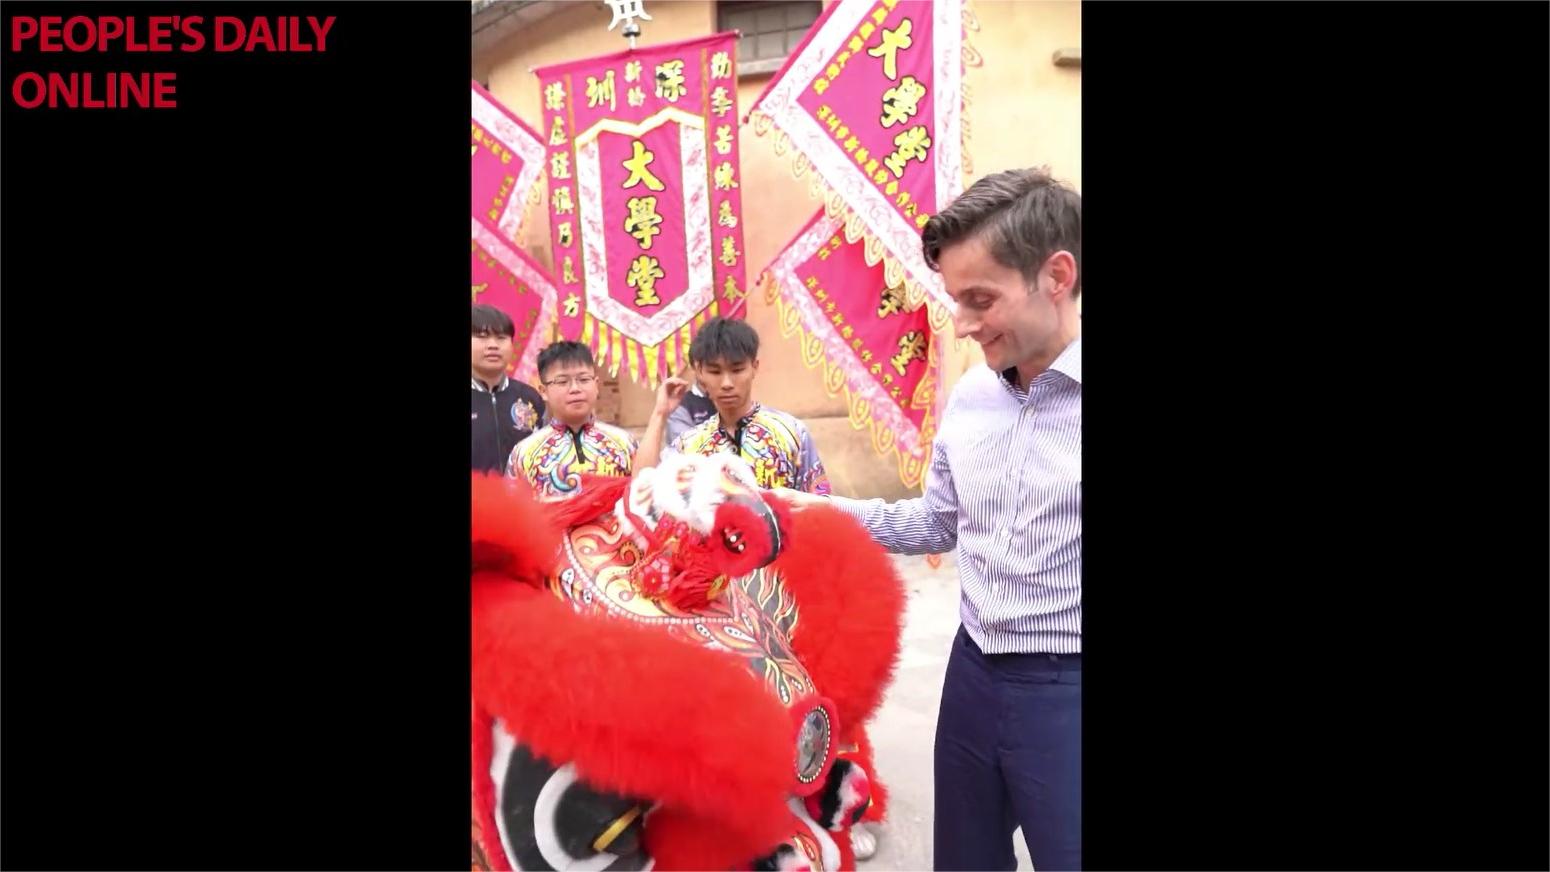 Foreign journalists try lion dance in Shenzhen